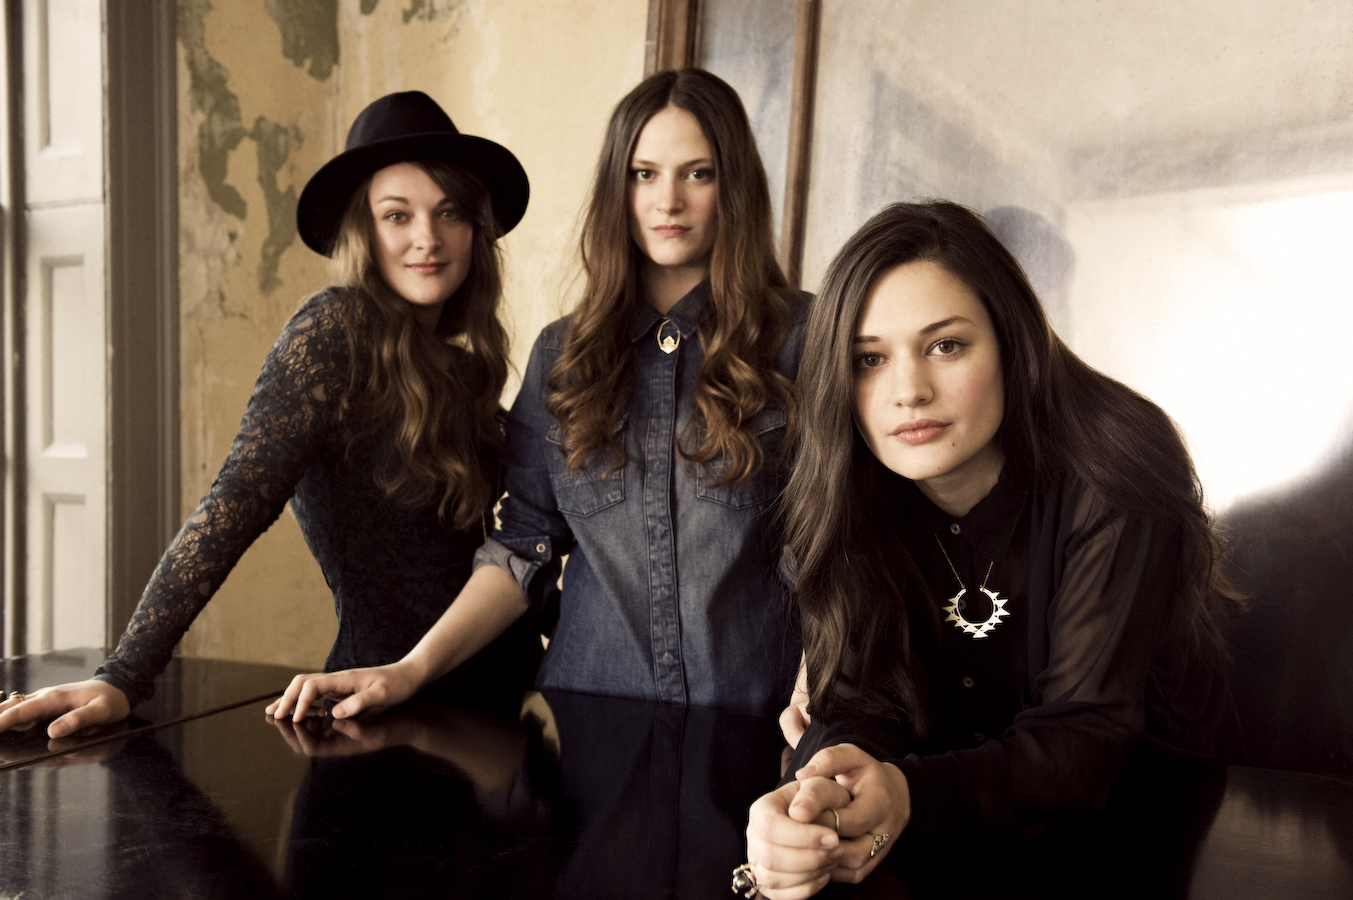 The staves Band. The staves & YMUSIC - the way is read. Jessica Stavely Taylor. Сравнение фолк и фолктроника. Трио сестер